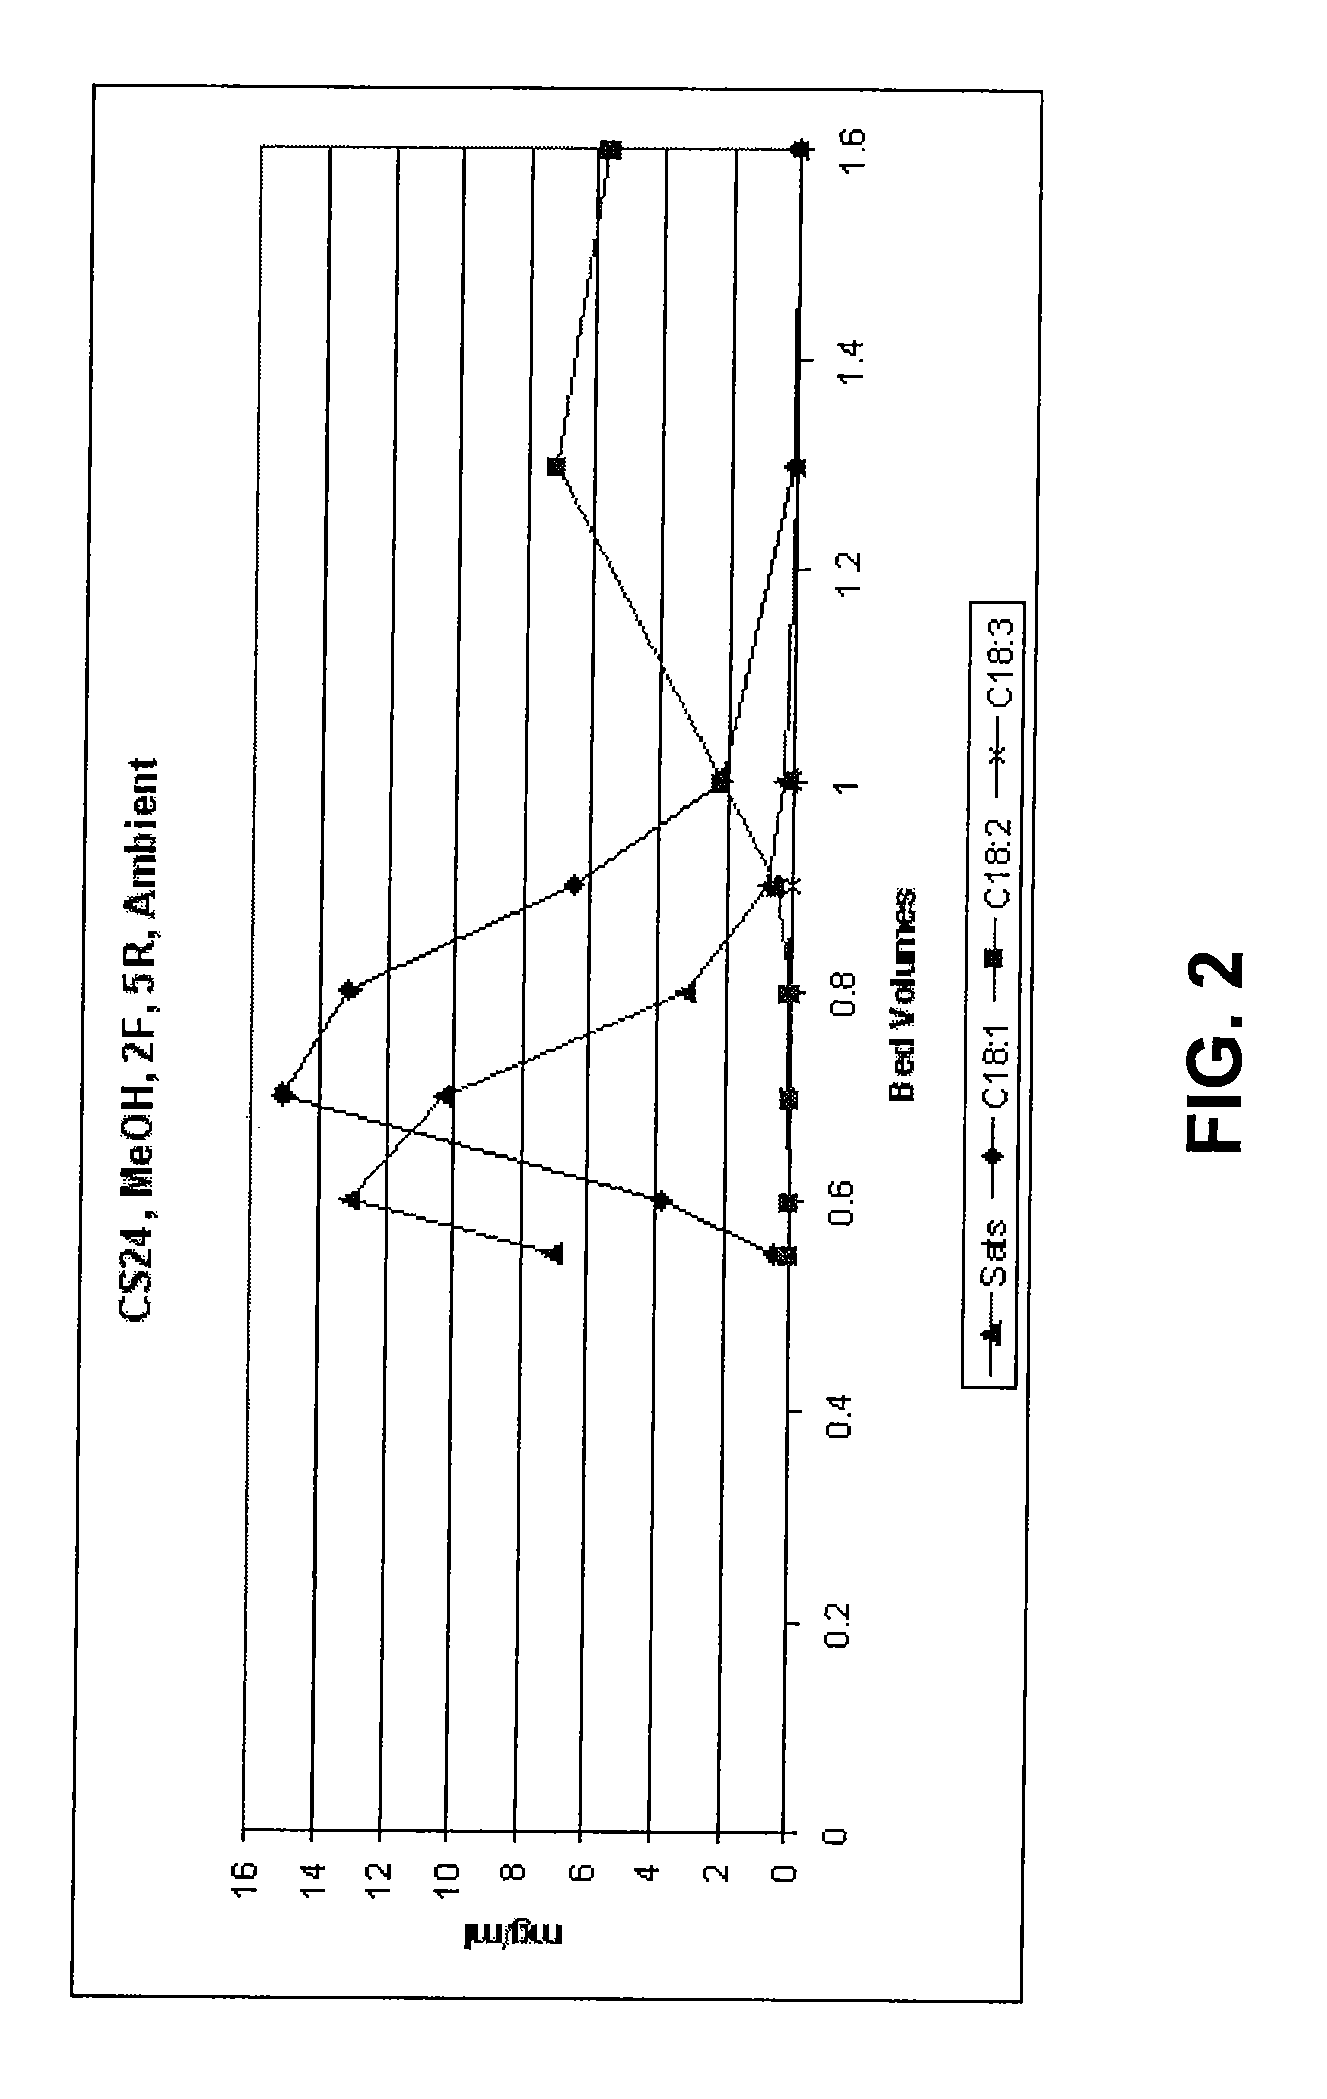 Method of preparing a composition using argentation chromatography